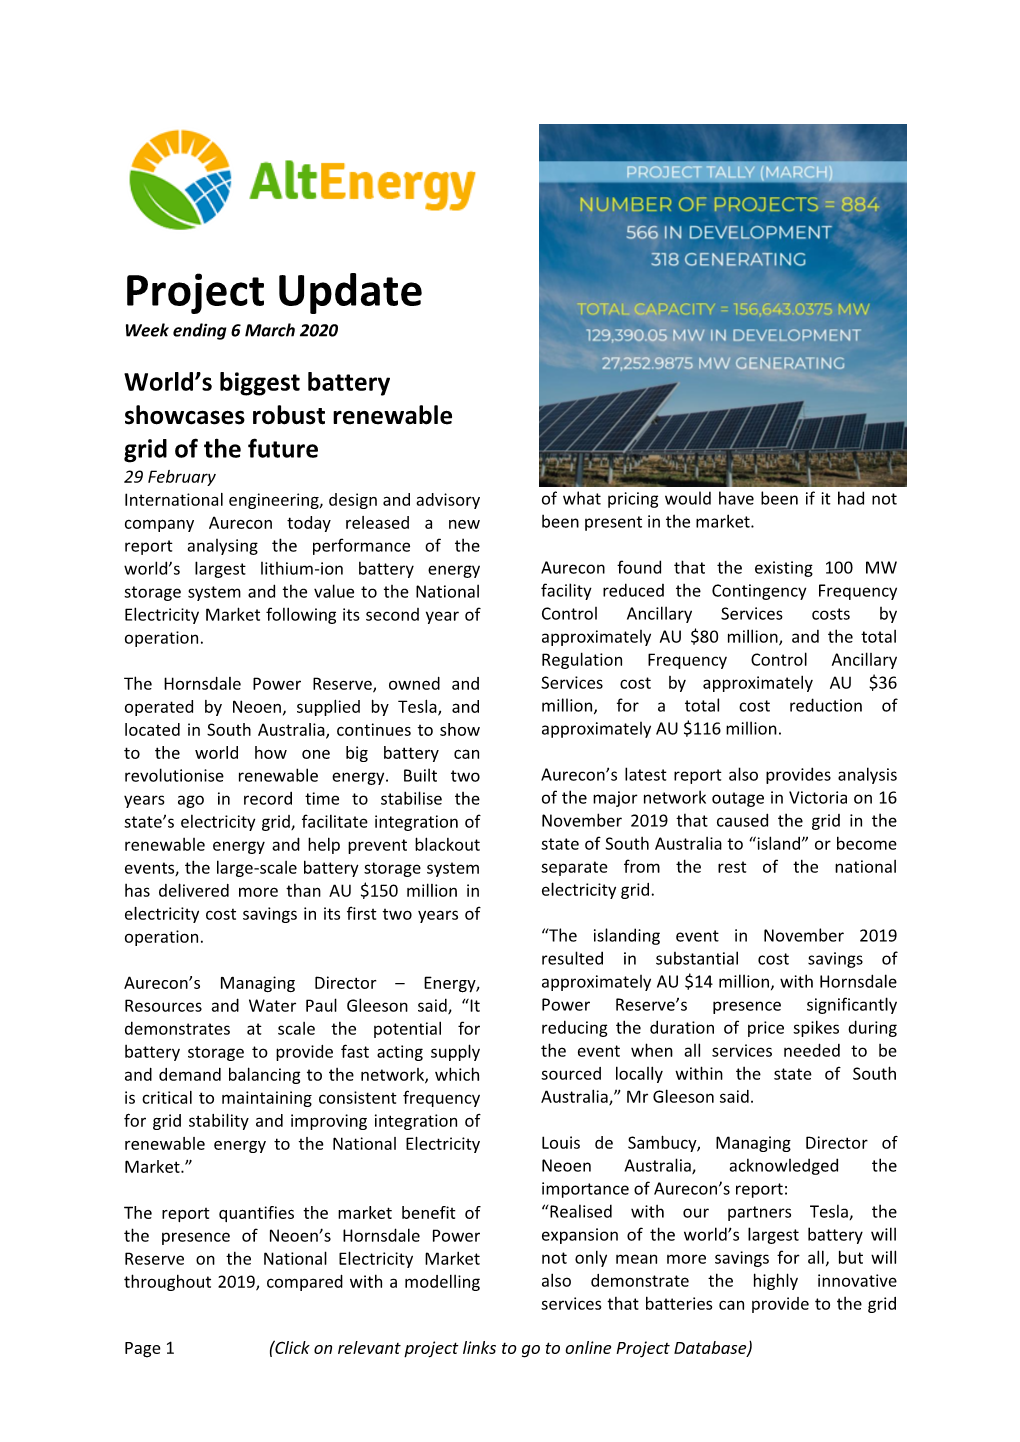 Project Update Week Ending 6 March 2020